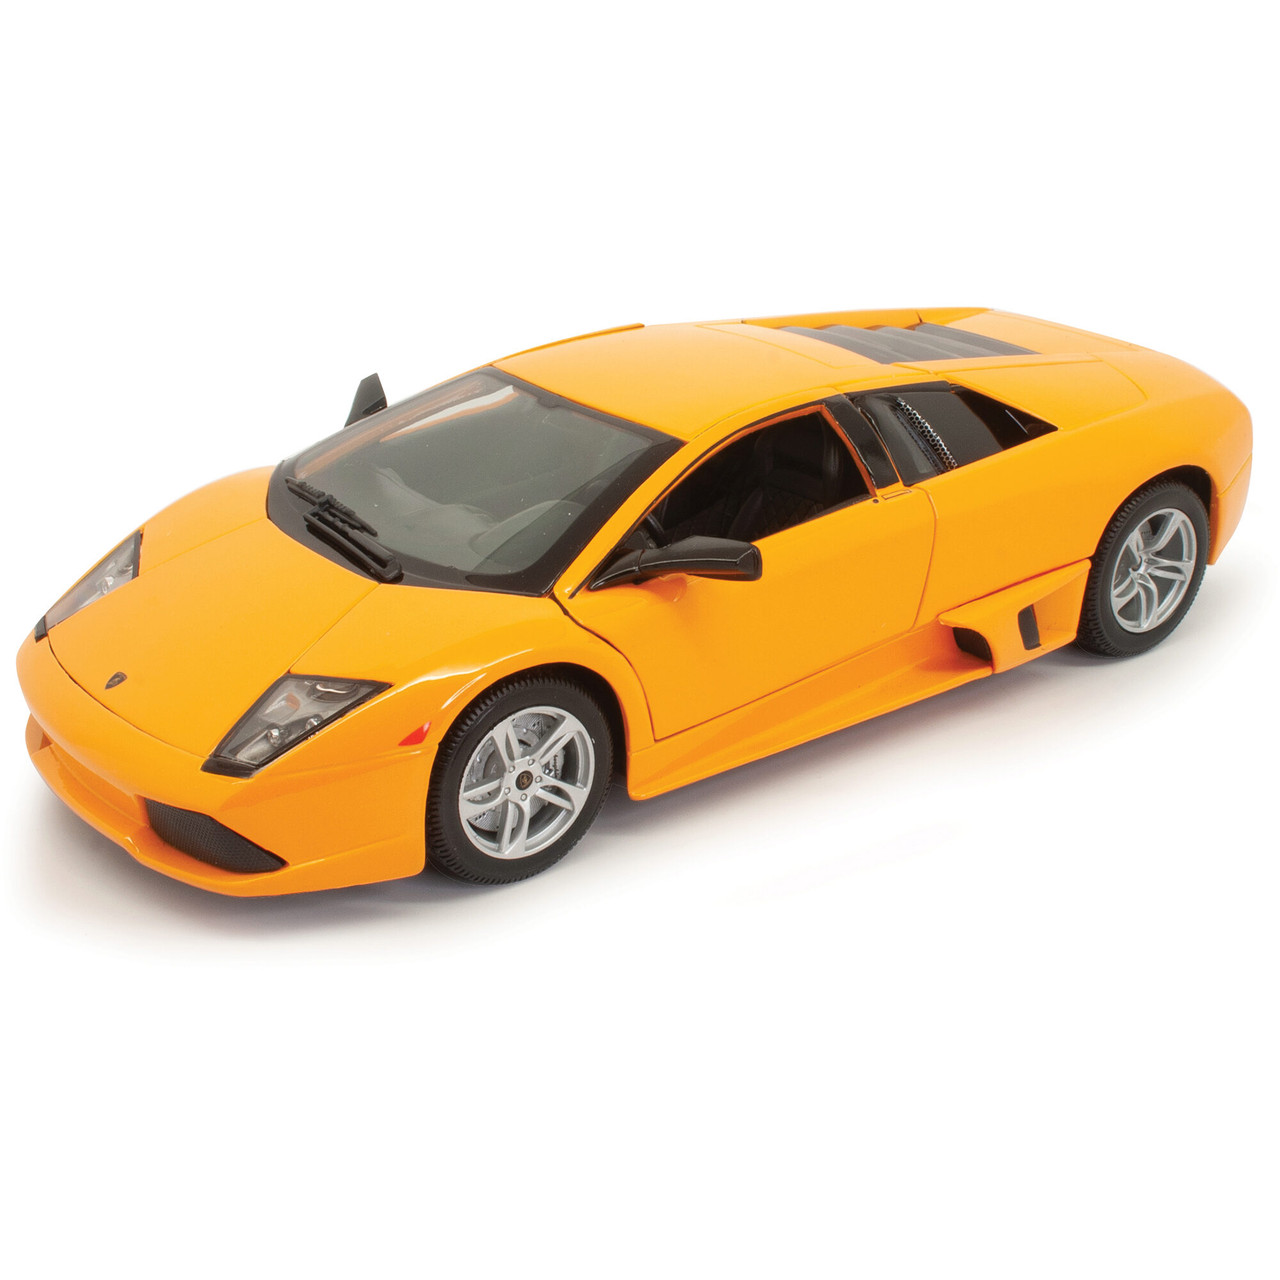 2007 Lamborghini Murciélago LP 640 1:18 Scale Diecast Model by Maisto |  Fairfield Collectibles - The #1 Source For High Quality Diecast Scale Model  Cars